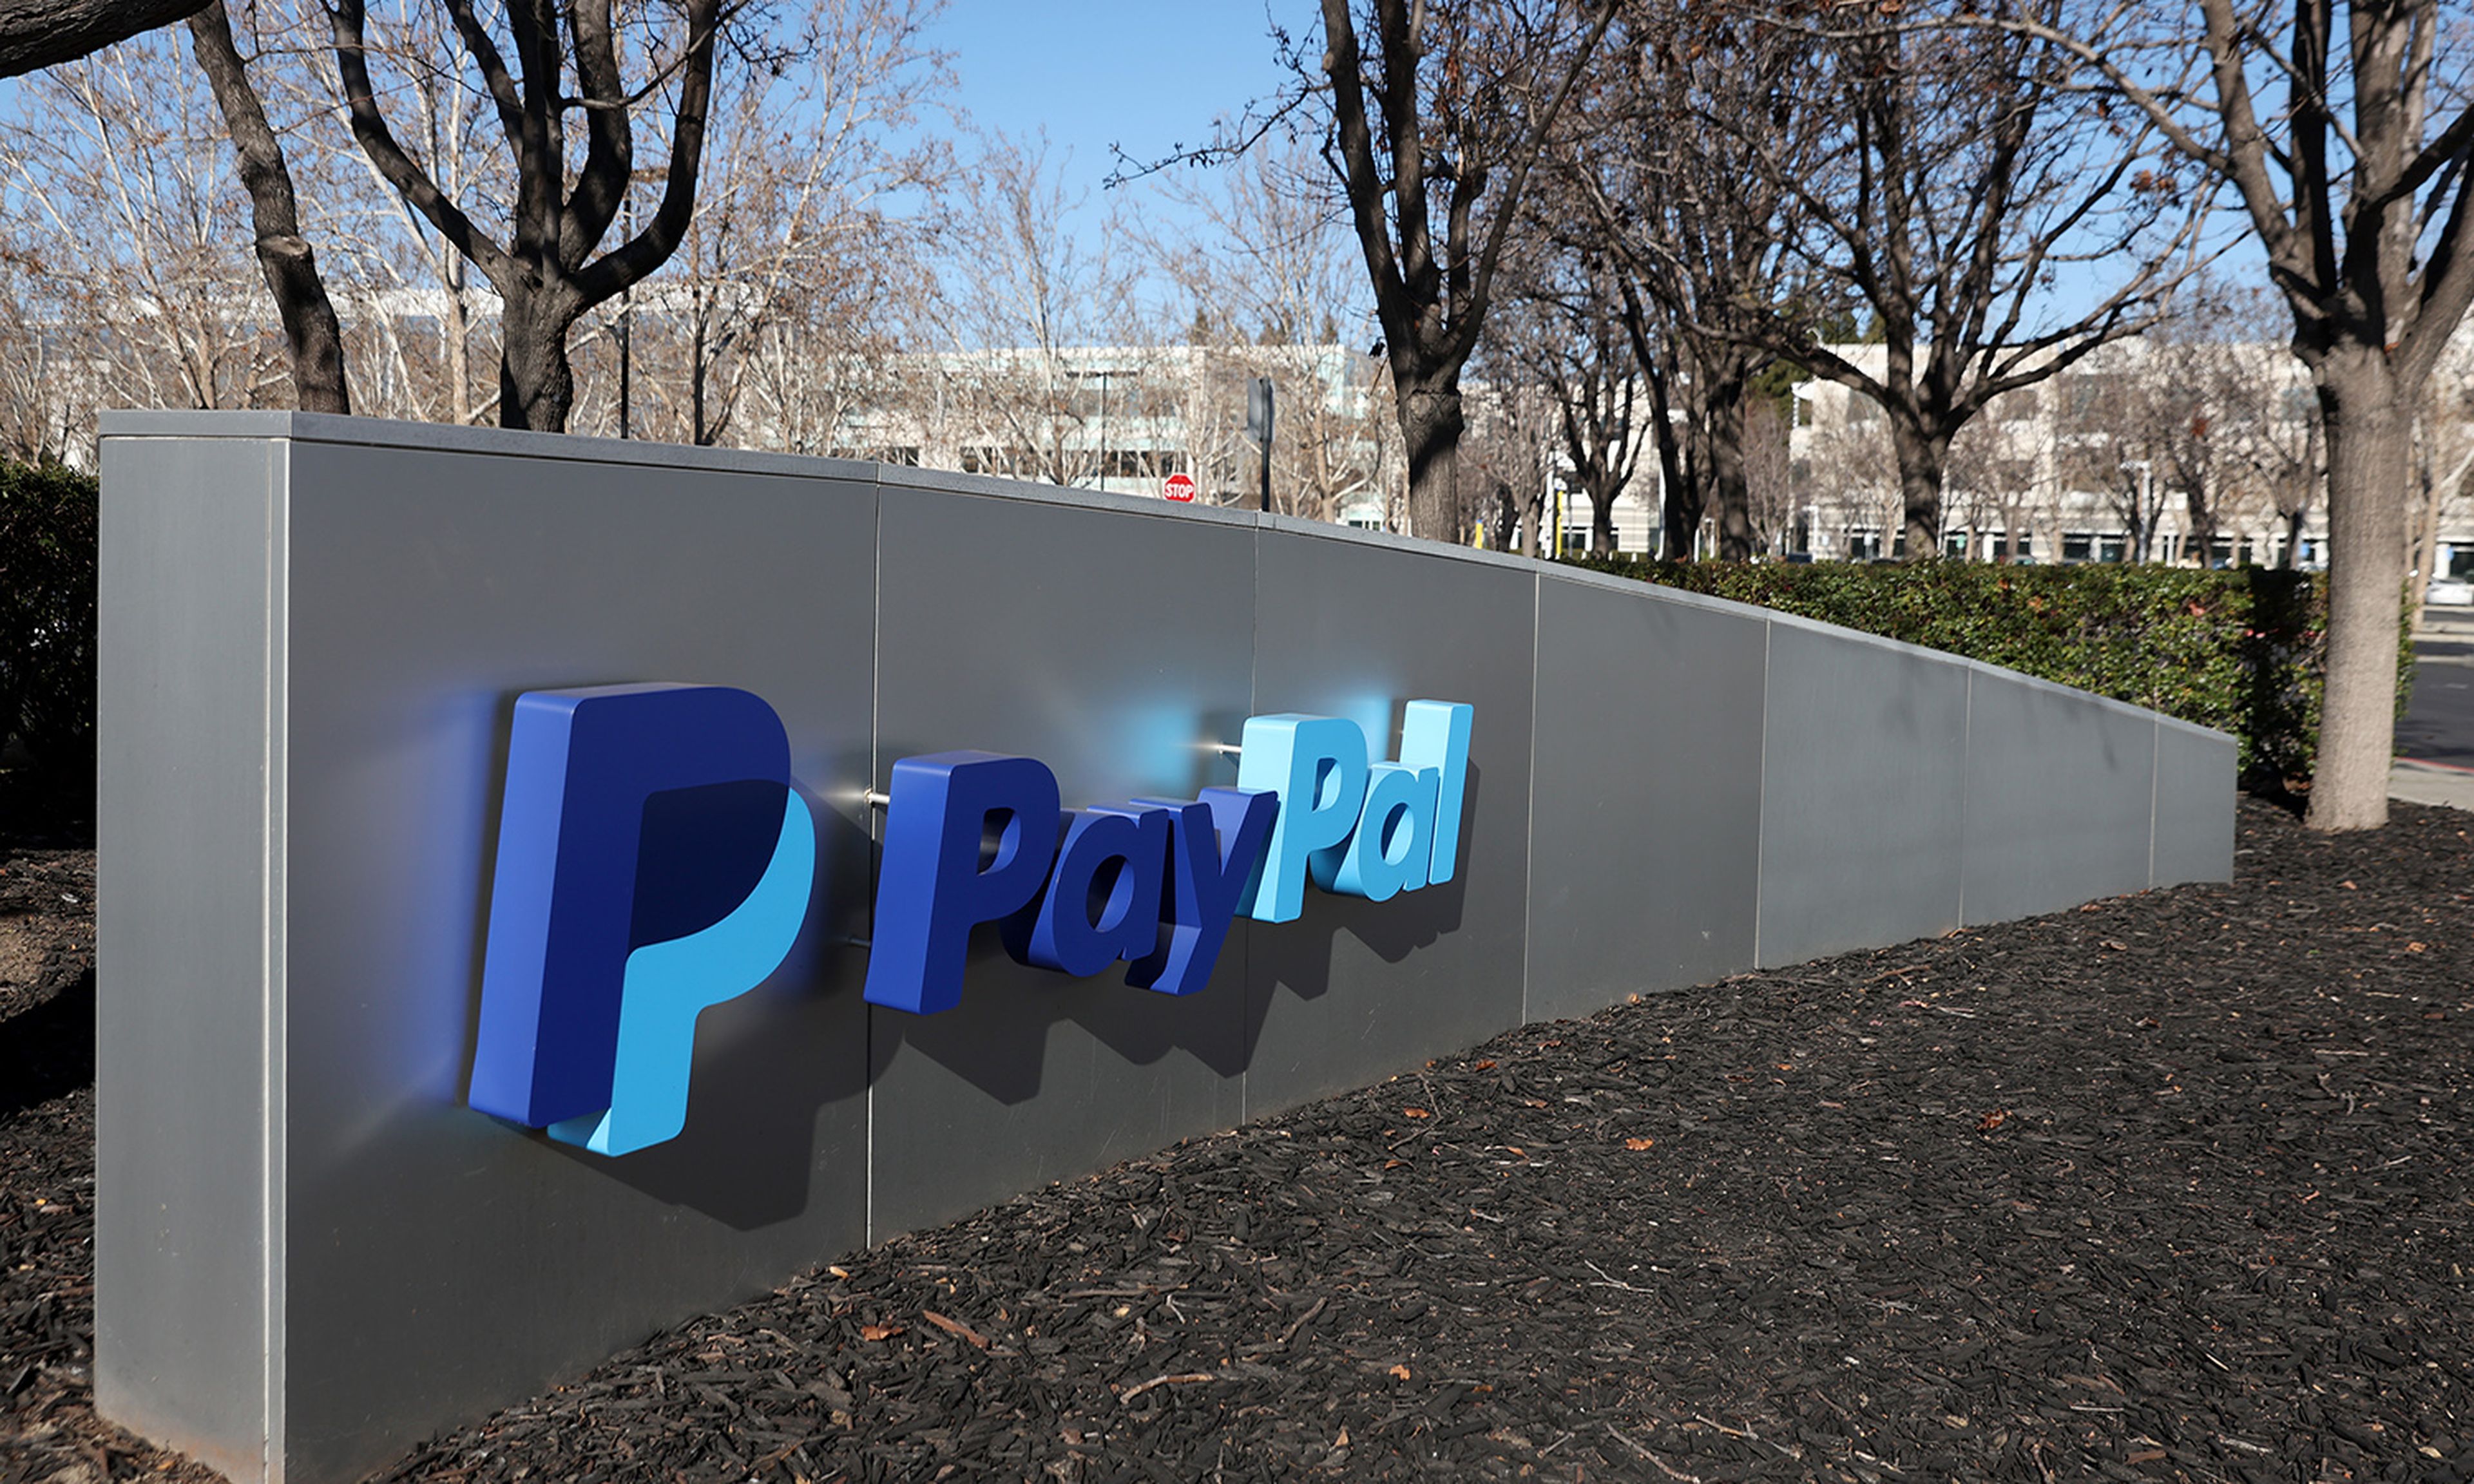 A decade after online giants such as PayPal launched DMARC, more financial players are embracing the email validation system to curb business email compromise. Pictured: A sign is posted in front of PayPal headquarters on Feb. 2, 2022, in San Jose, Calif. (Photo by Justin Sullivan/Getty Images)